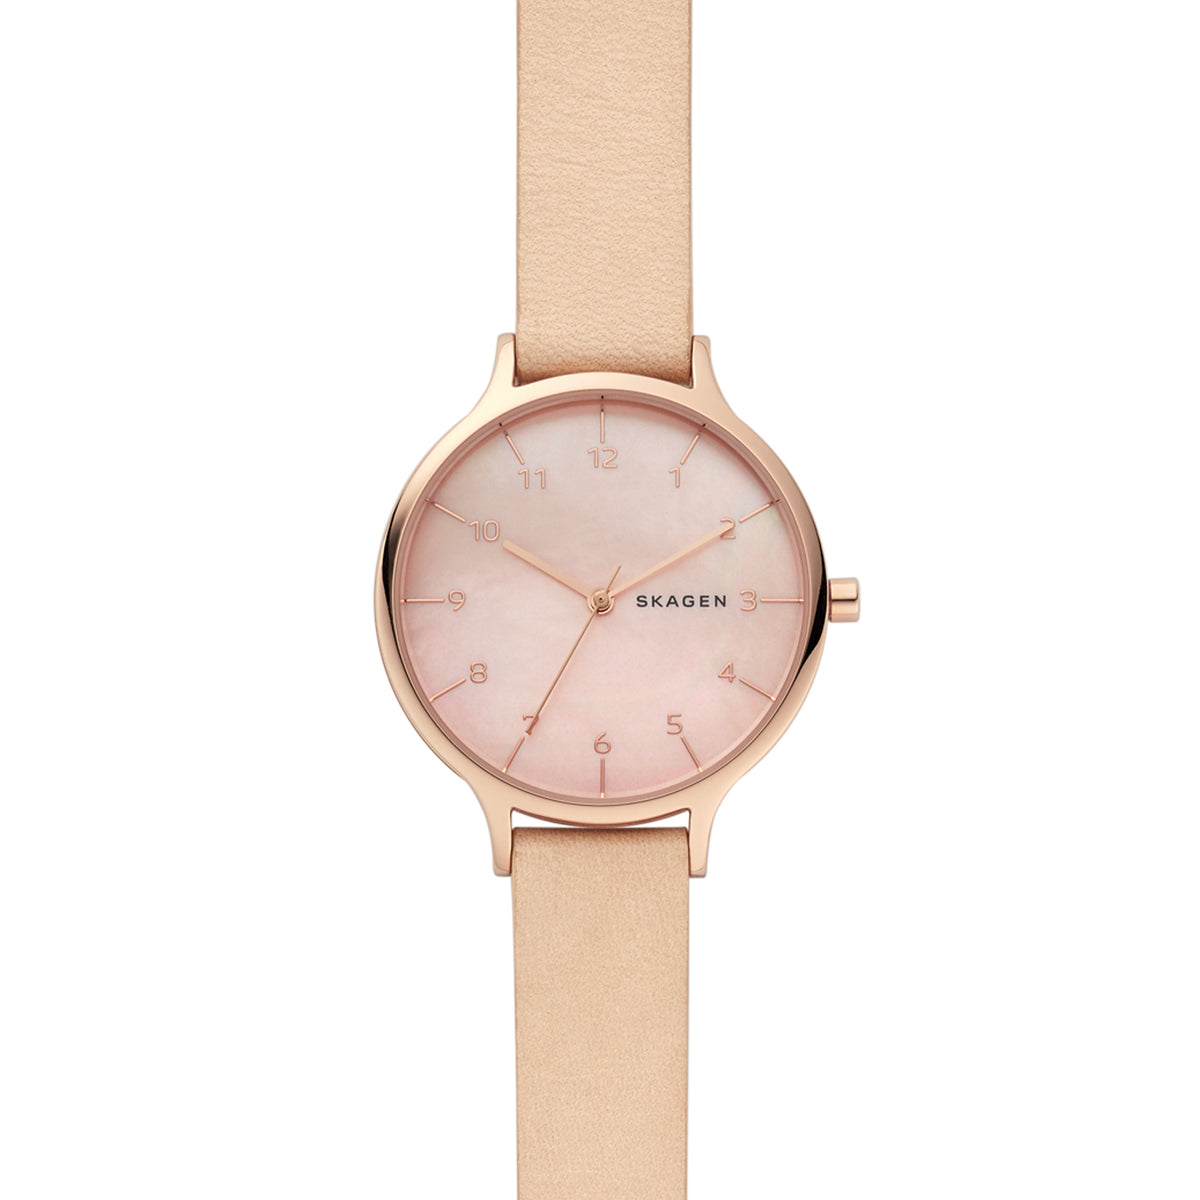 Skagen - Anita Mother-of-Pearl Nude Leather Watch